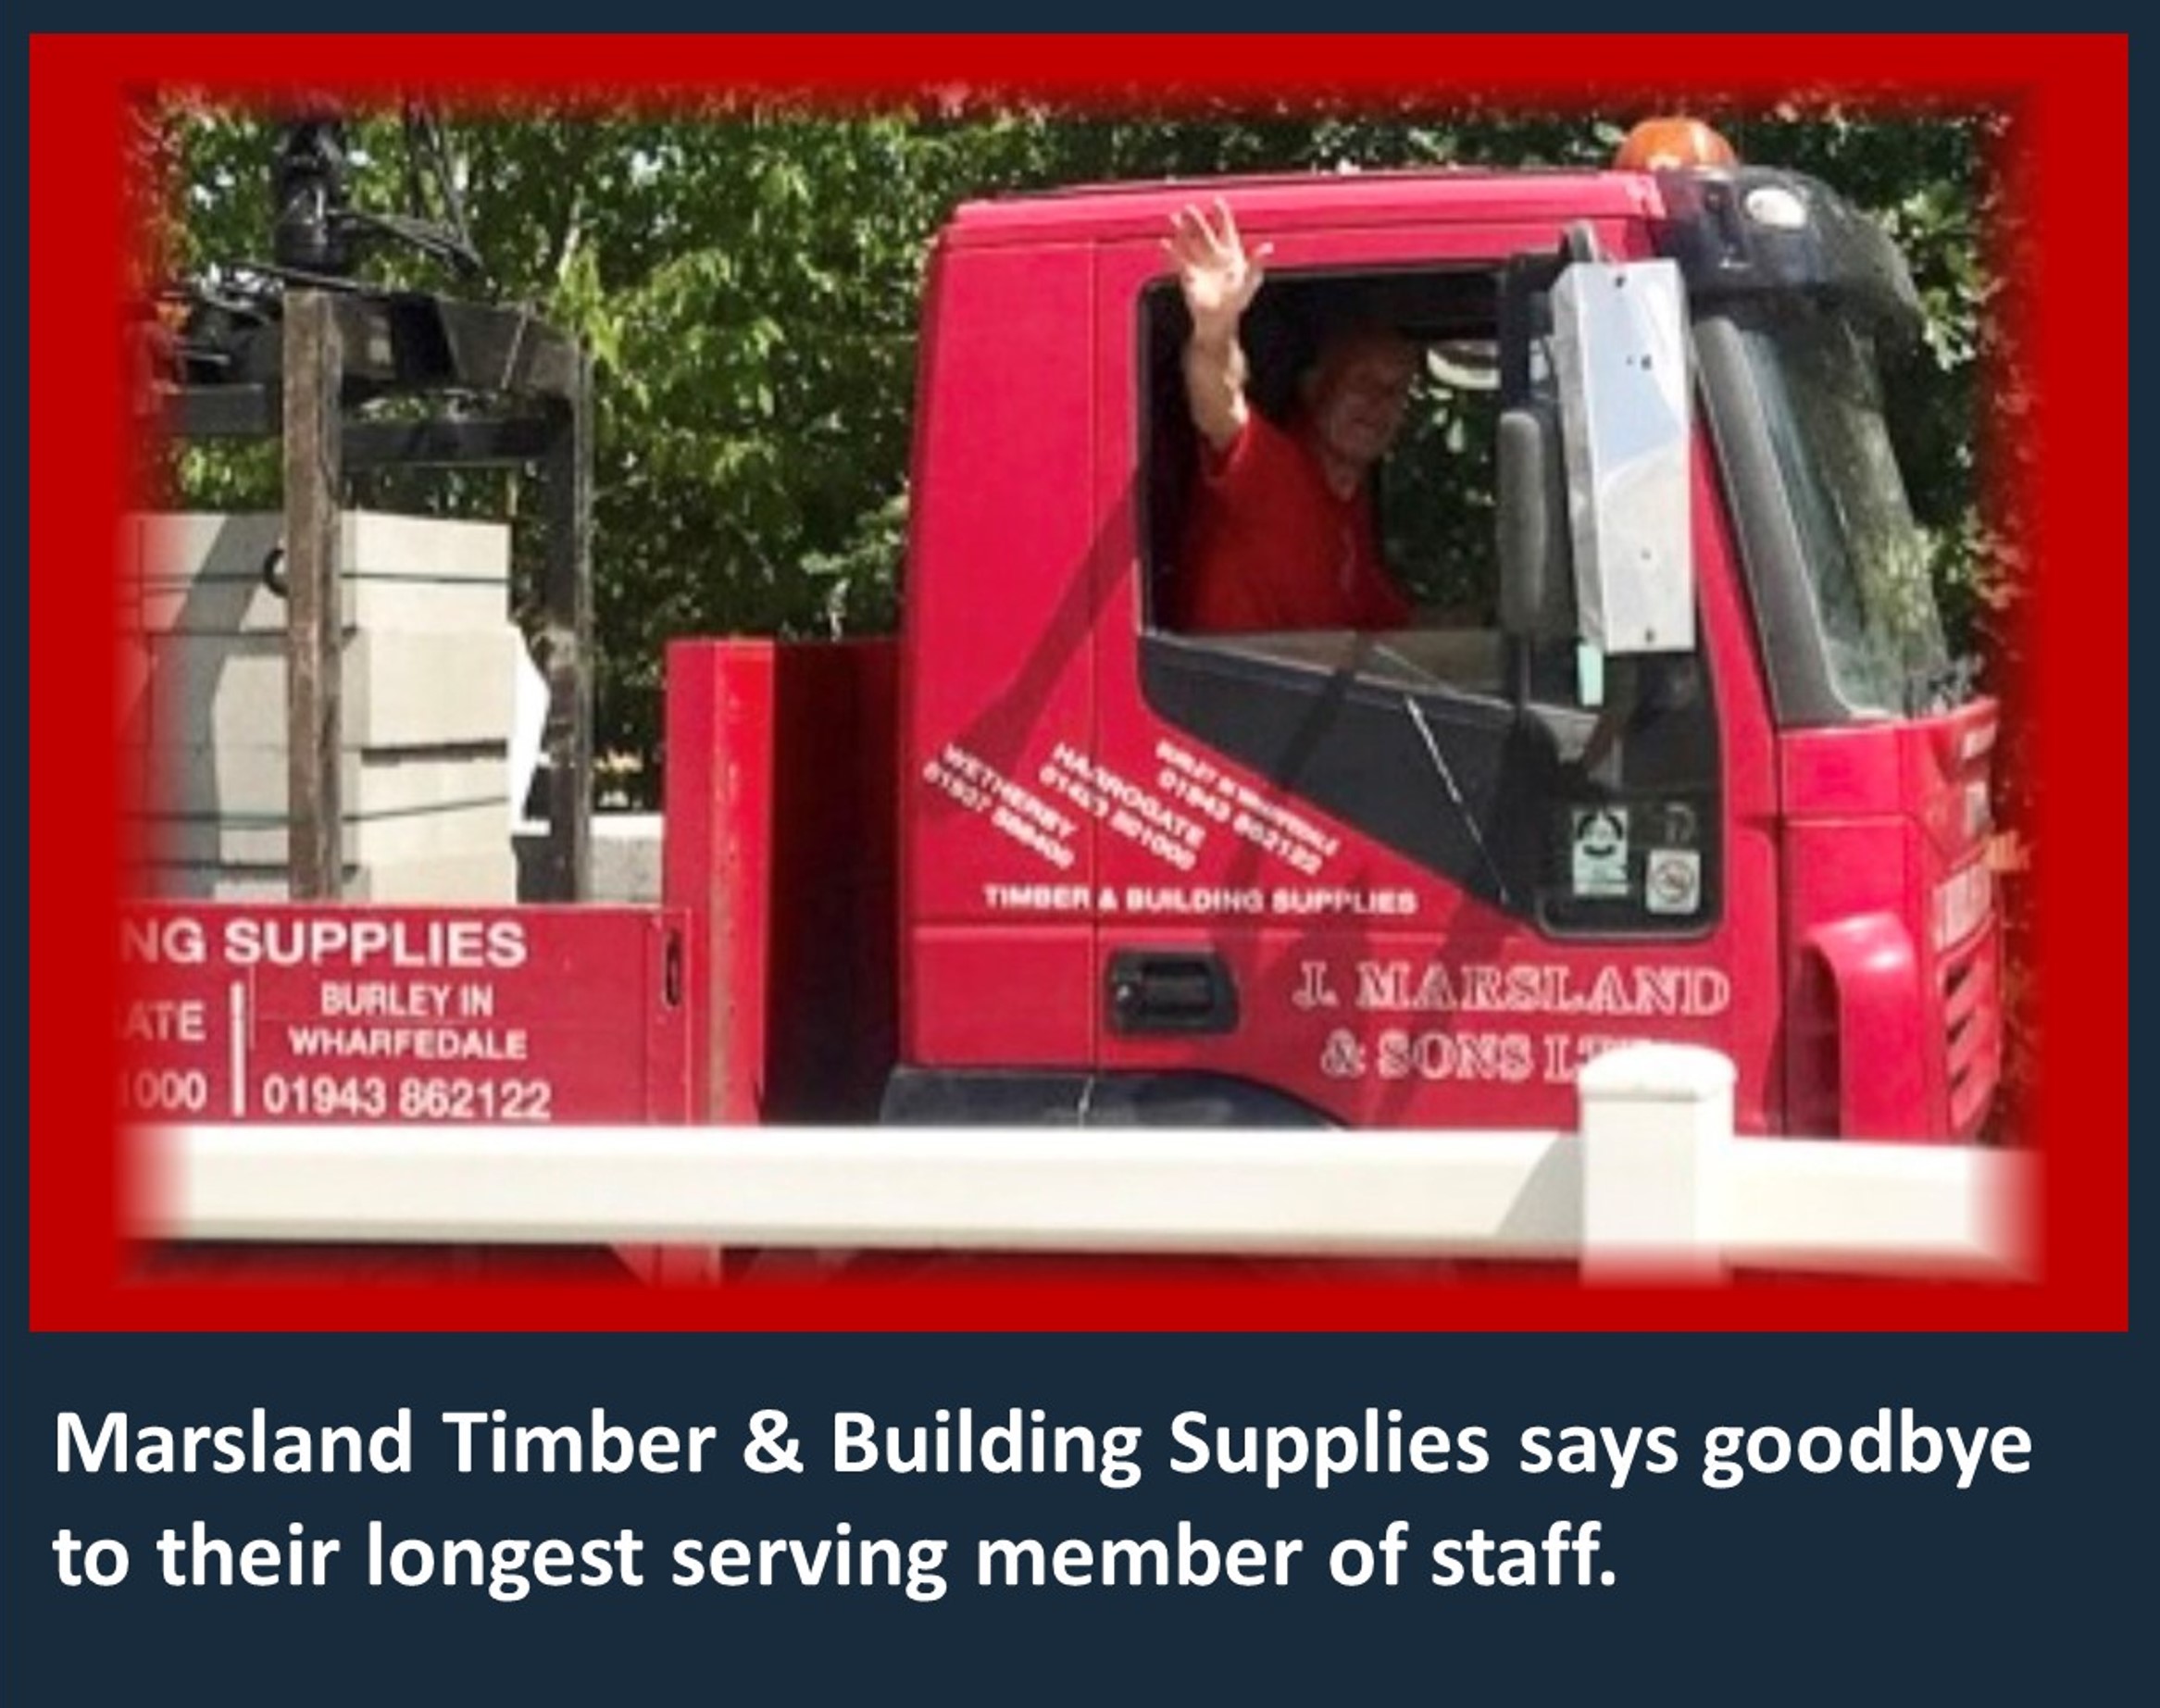 Marsland Timber & Building Supplies says goodbye to their longest serving member of staff.